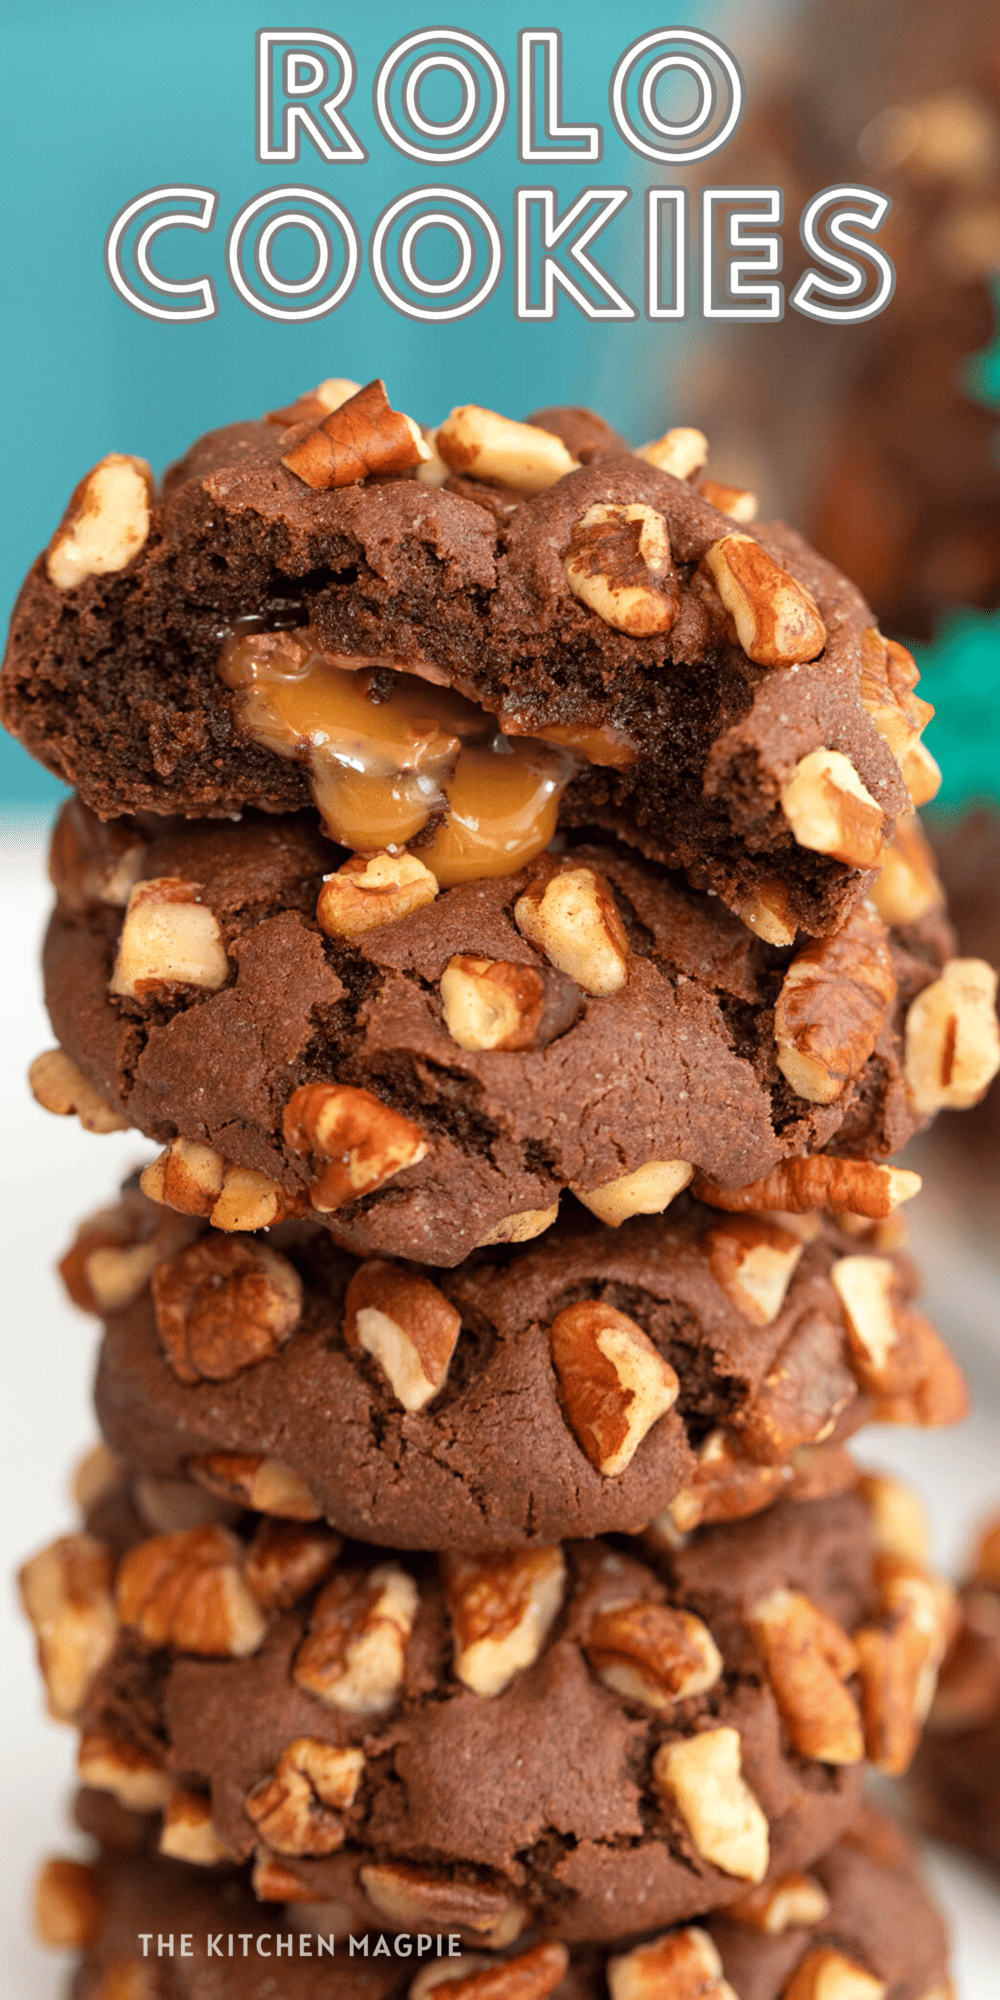 These Rolo cookies are a chocolate cookie that has a Rolo candy stuffed in the middle and then covered in pecans. An 80's cookies classic! 